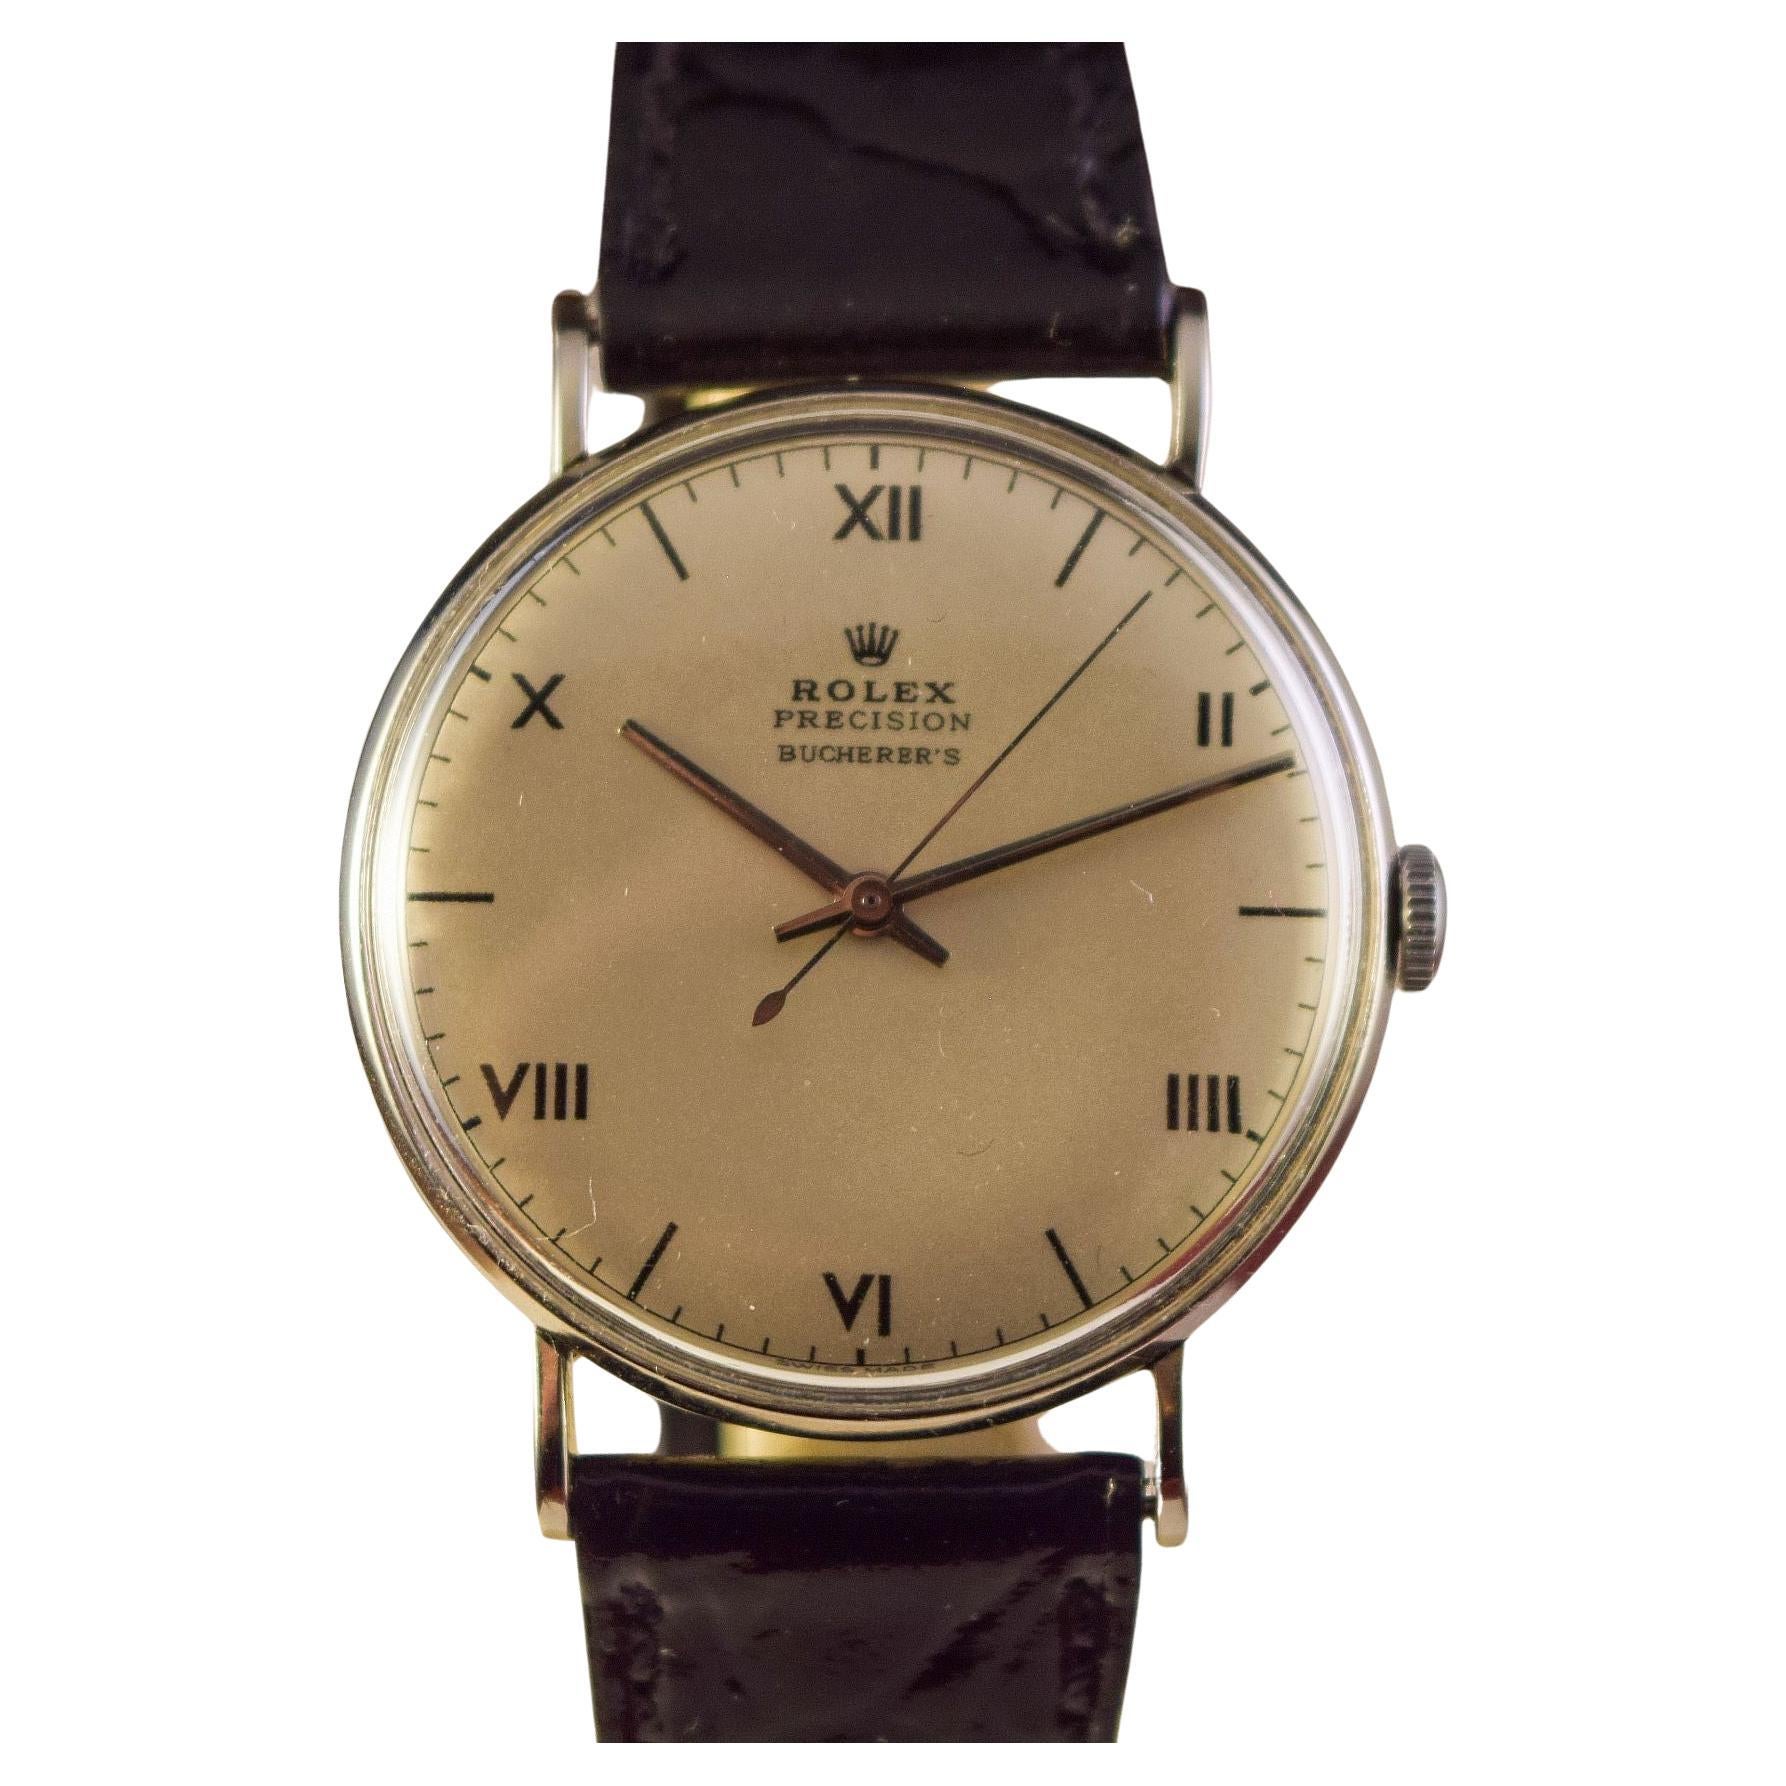 Very Elegant early Rolex Steel Case.
This watch is from the 1940's retailed by Bucherer.
Attractive dial is Signed Rolex Precision Bucherer's
Fine Black Roman Numerals and markers.
Steel Hands and Center second hand.
Manual winding